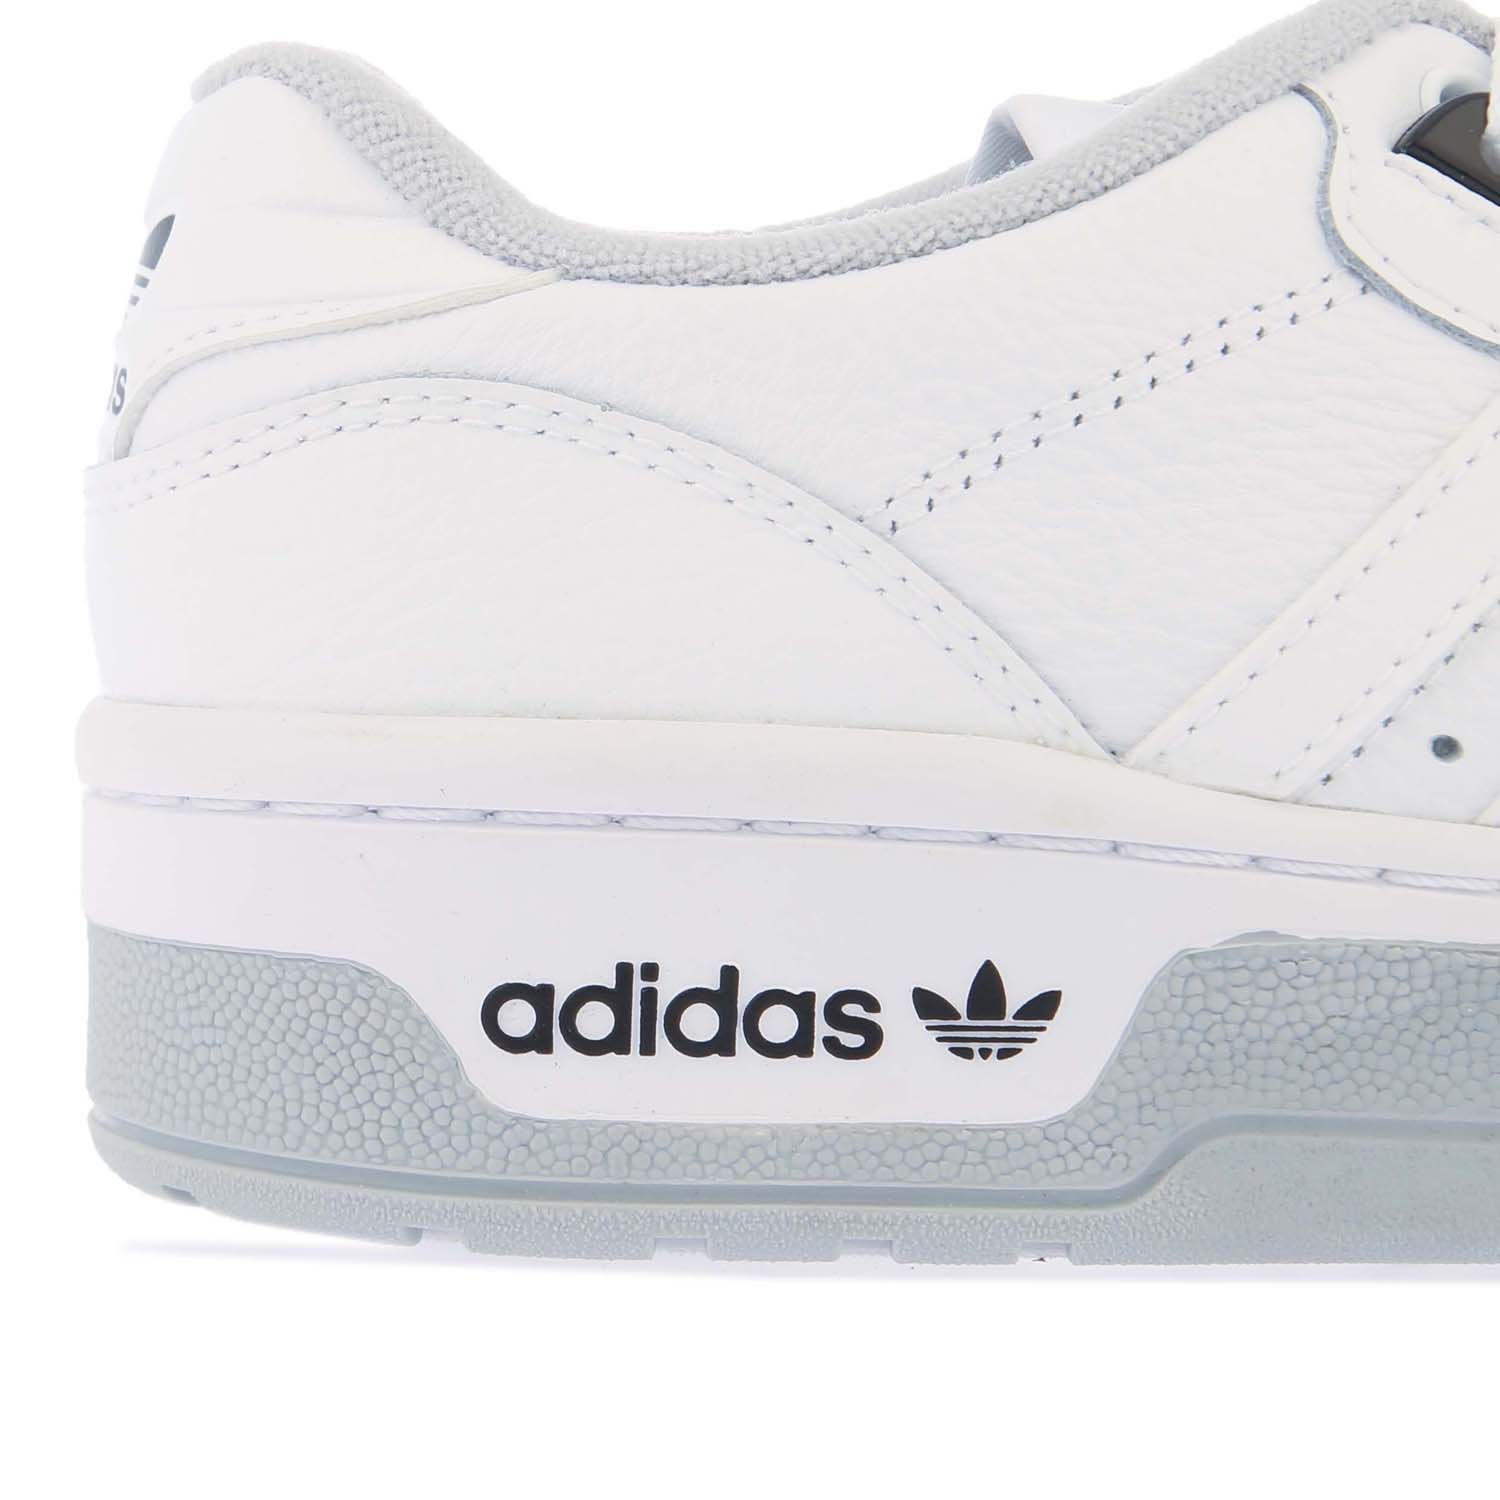 Womens adidas Rivalry Low Premium Trainers in white grey.- Leather upper. - Lace fastening.- Exposed foam tongue.- Terry towel lining.- Rubber outsole.- Leather upper  Textile lining.- Ref.: H04398